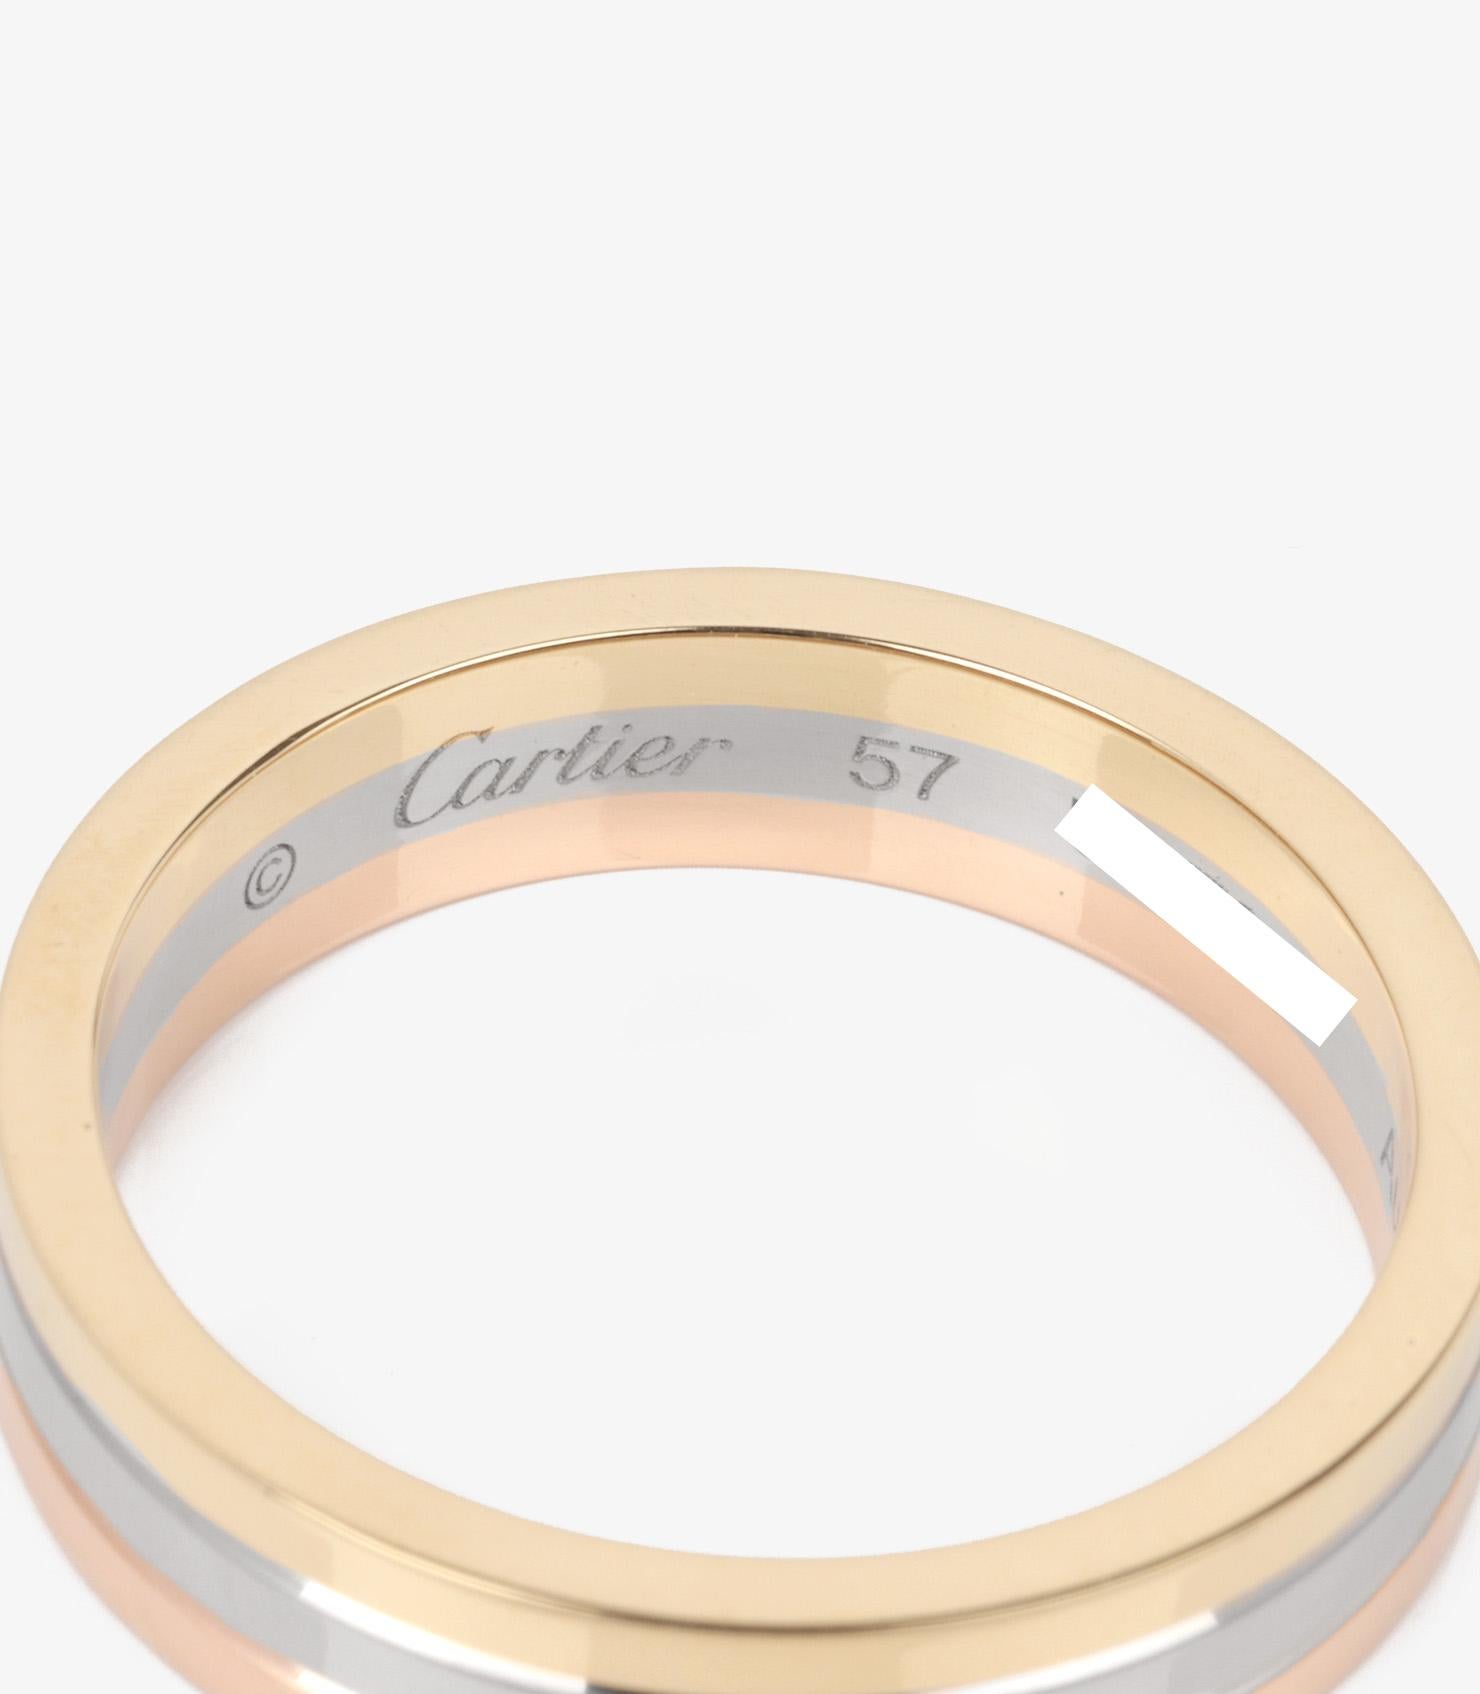 Cartier 18ct White Gold, Yellow Gold And Rose Gold Vendôme Louis Cartier Wedding In Excellent Condition For Sale In Bishop's Stortford, Hertfordshire